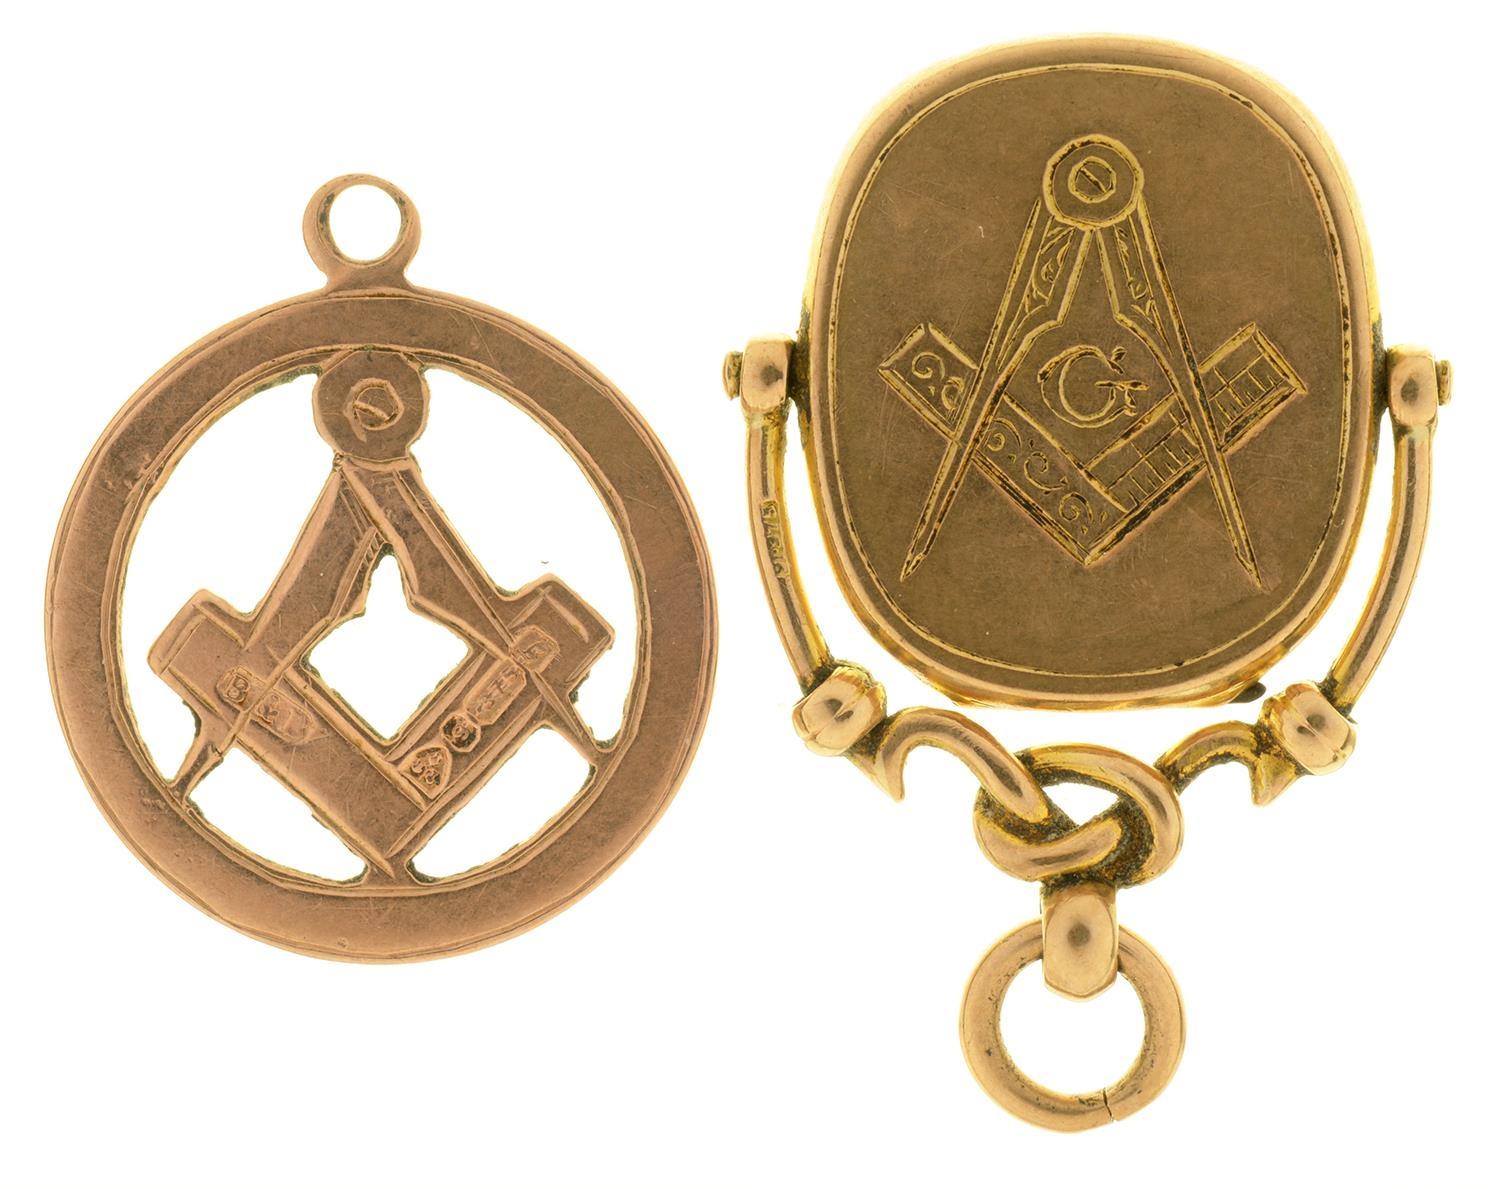 A PIERCED 9CT GOLD MASONIC PENDANT, 22MM D, CHESTER 1919 AND A CONTEMPORARY 9CT GOLD MASONIC